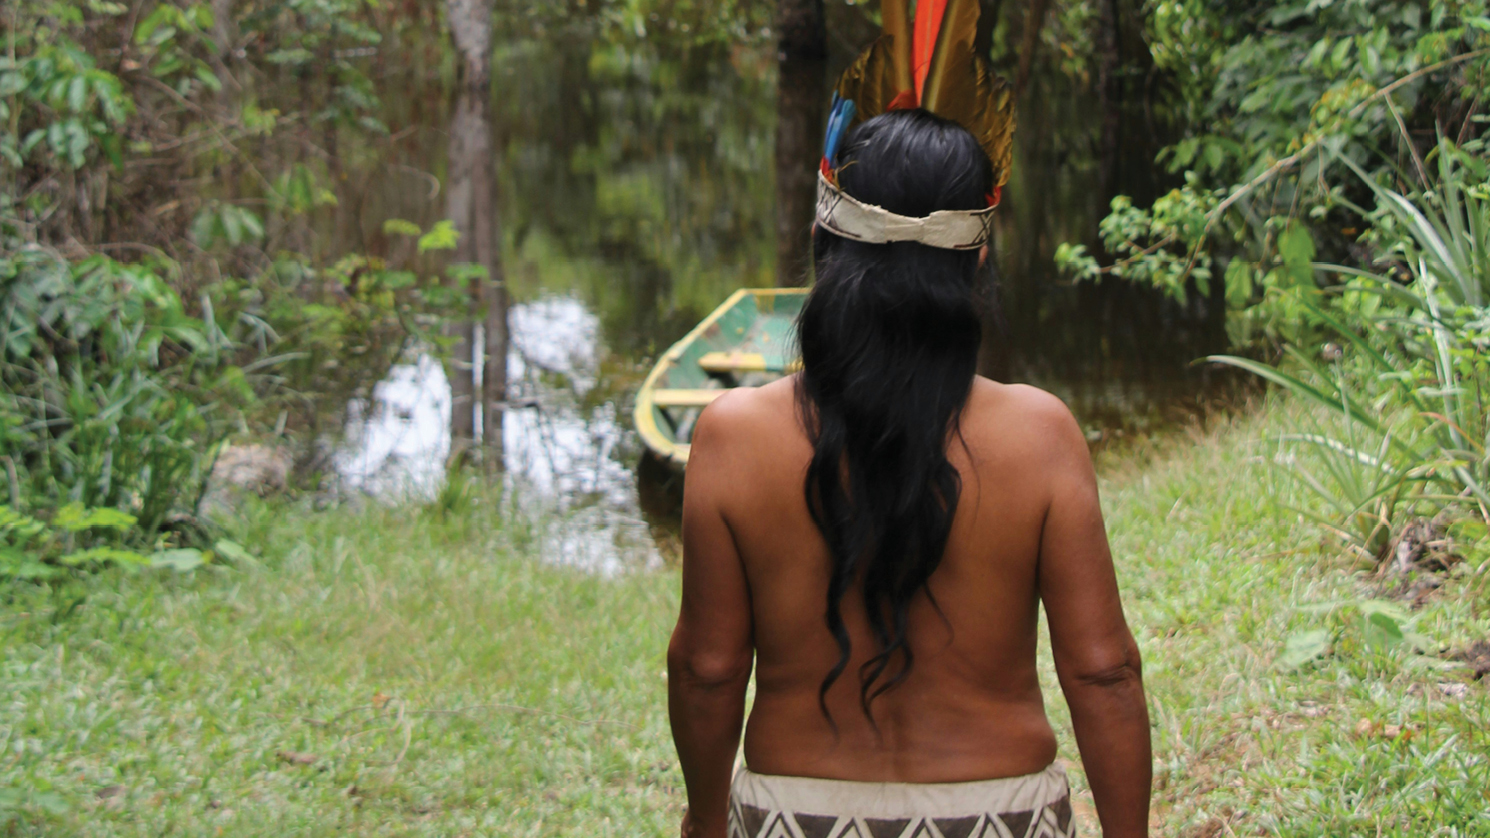 Indigenous person from the Amazon